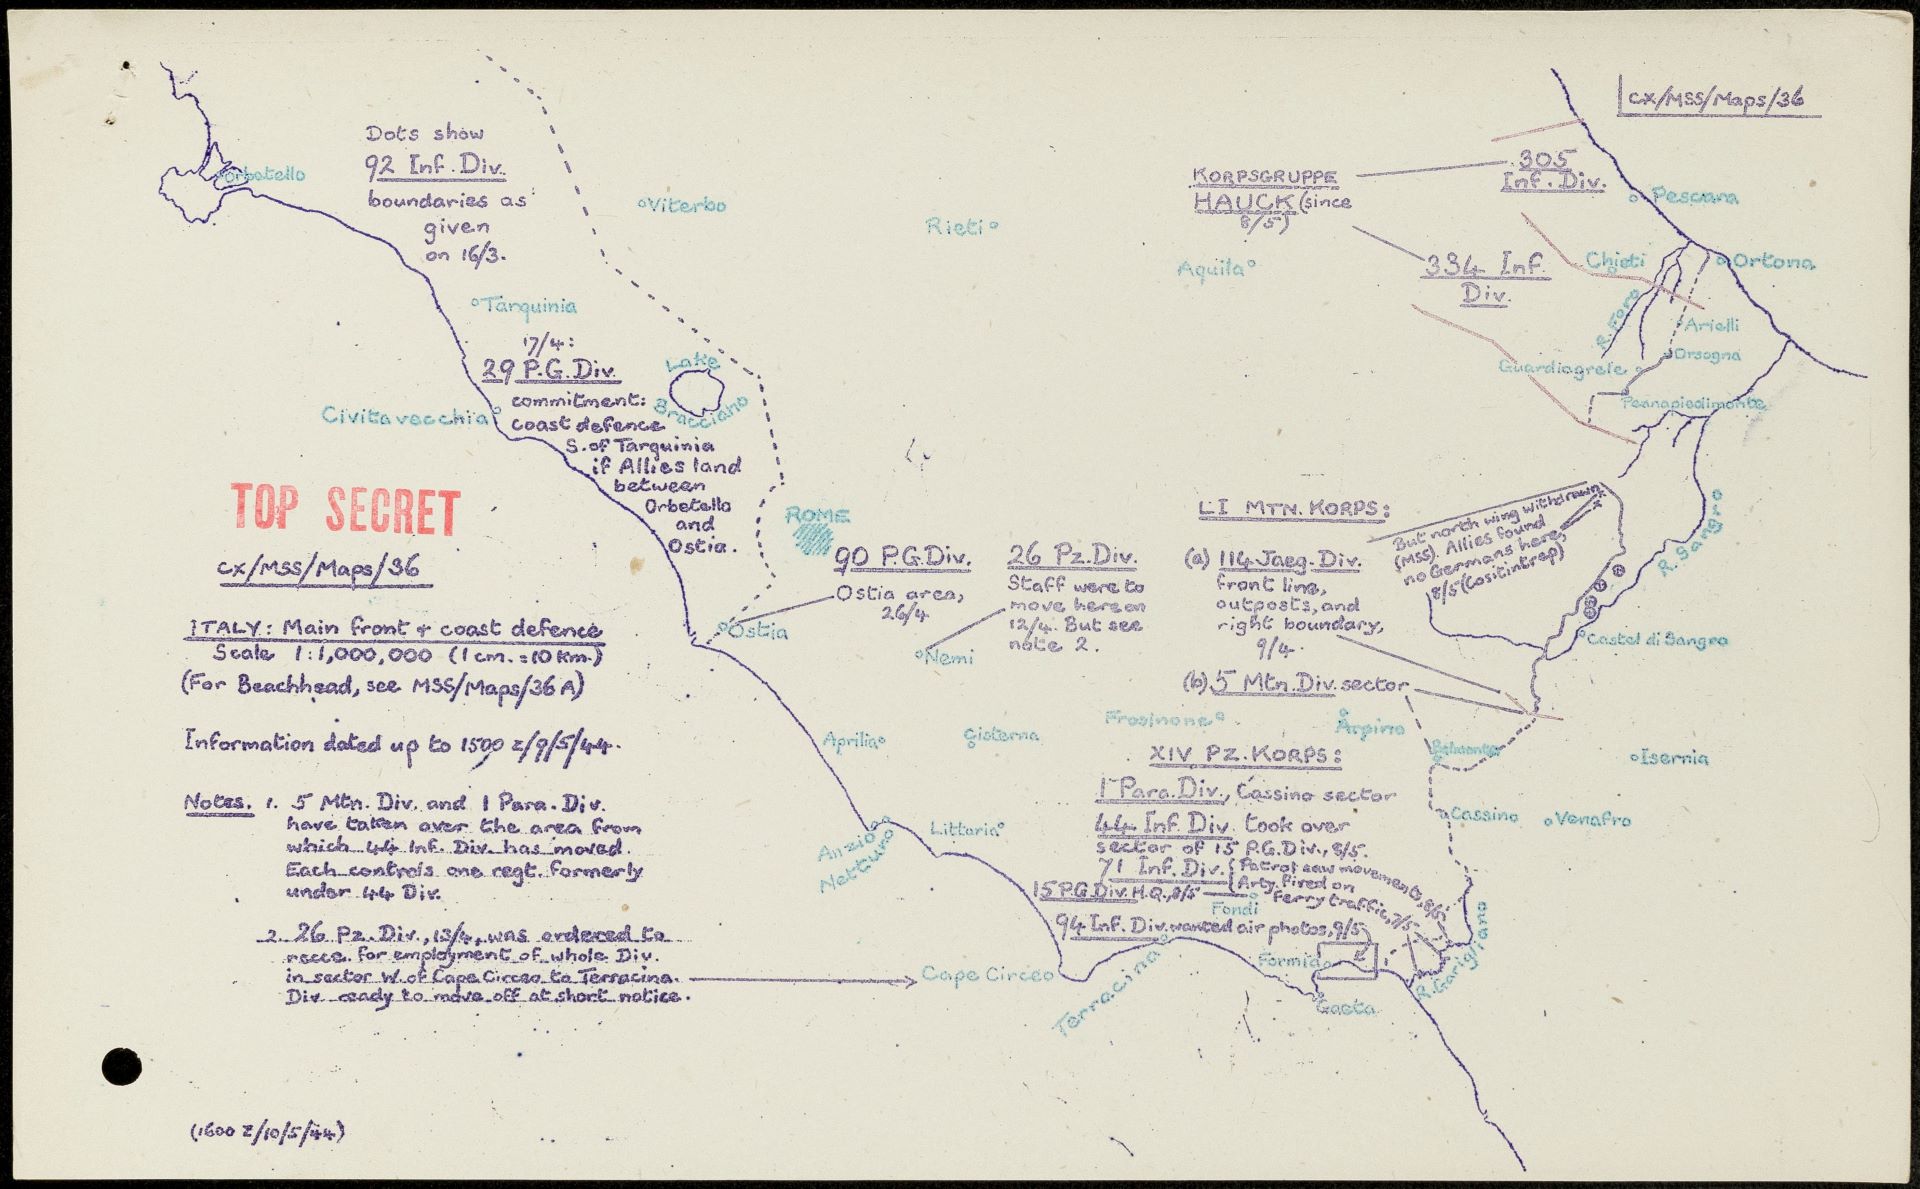 'Italy: Main front and coast defence' Map, based on information from decrypts of high-grade traffic, of dispositions of enemy forces in Egypt, Tunisia, Yugoslavia, Italy (Anzio beachhead), France. July 29, 1942-August 29, 1944. MS Government Communications Headquarters: HW 13